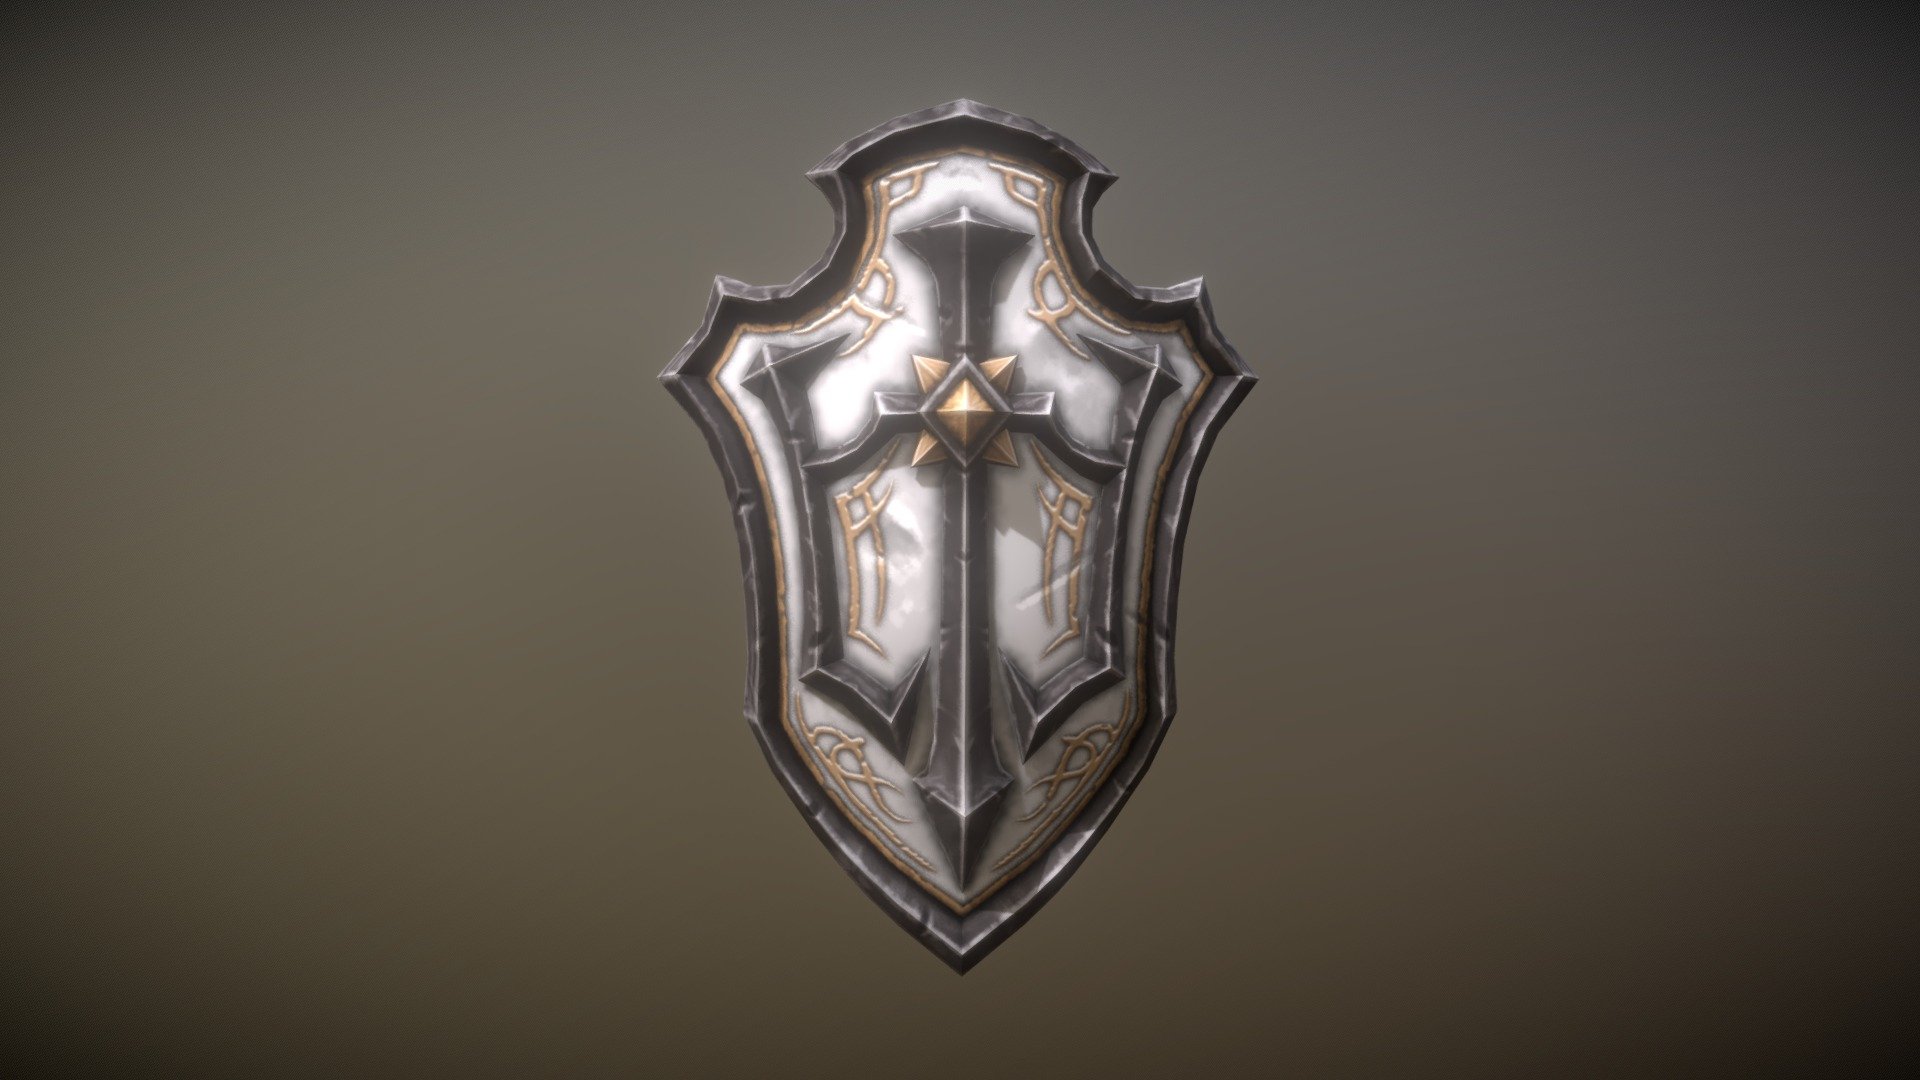 Put this shield into your character’s hand!




Low Poly (1358 Tris, 745 Verts)

All textures are 1024 x 1024 res (PNG format)

Model's unwrapped and UV Textured
 - Fantasy Armory - Templar Shield - Buy Royalty Free 3D model by vulcanus 3d model